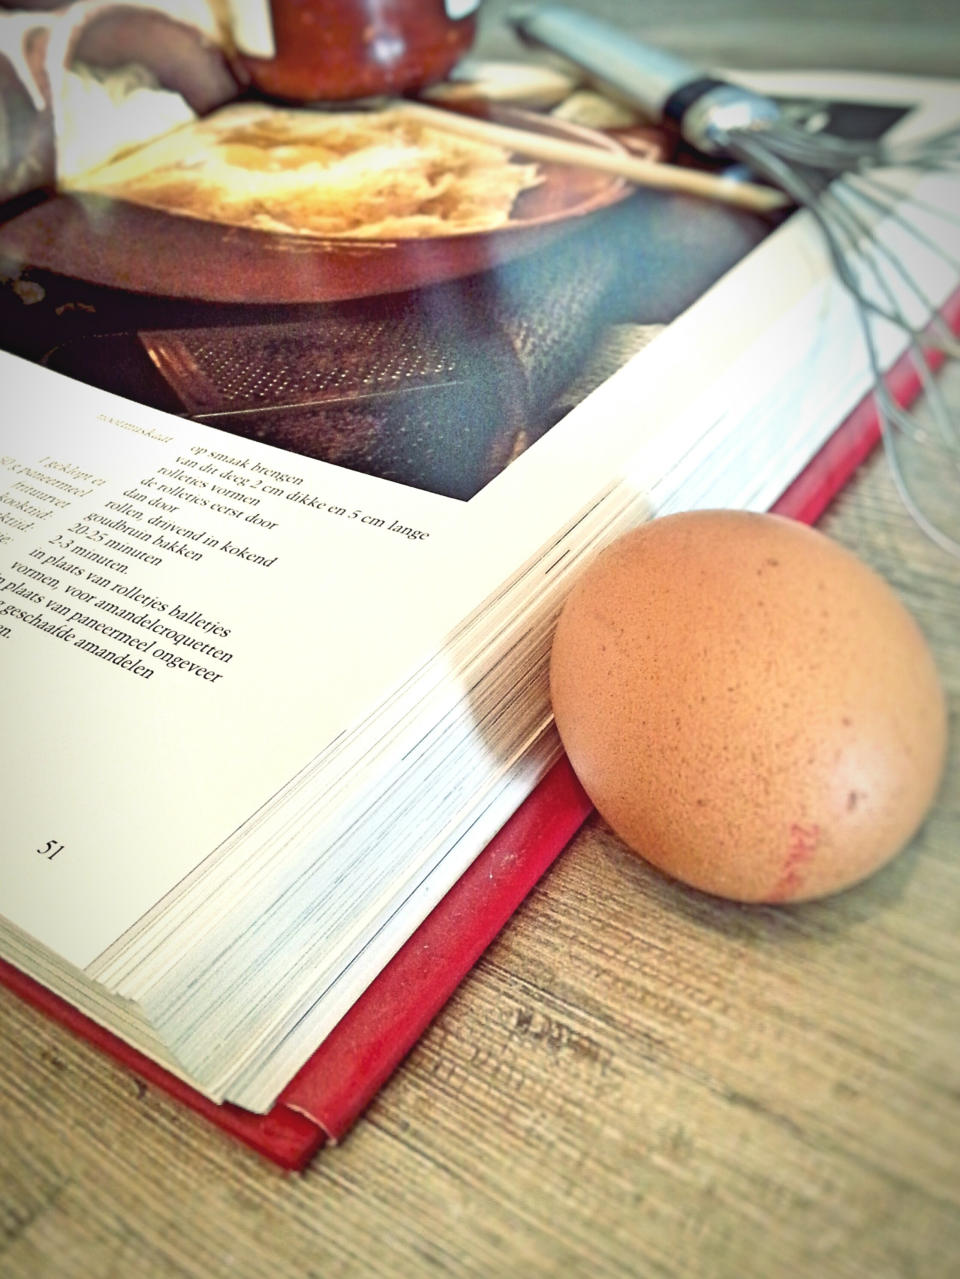 A cookbook and an egg.